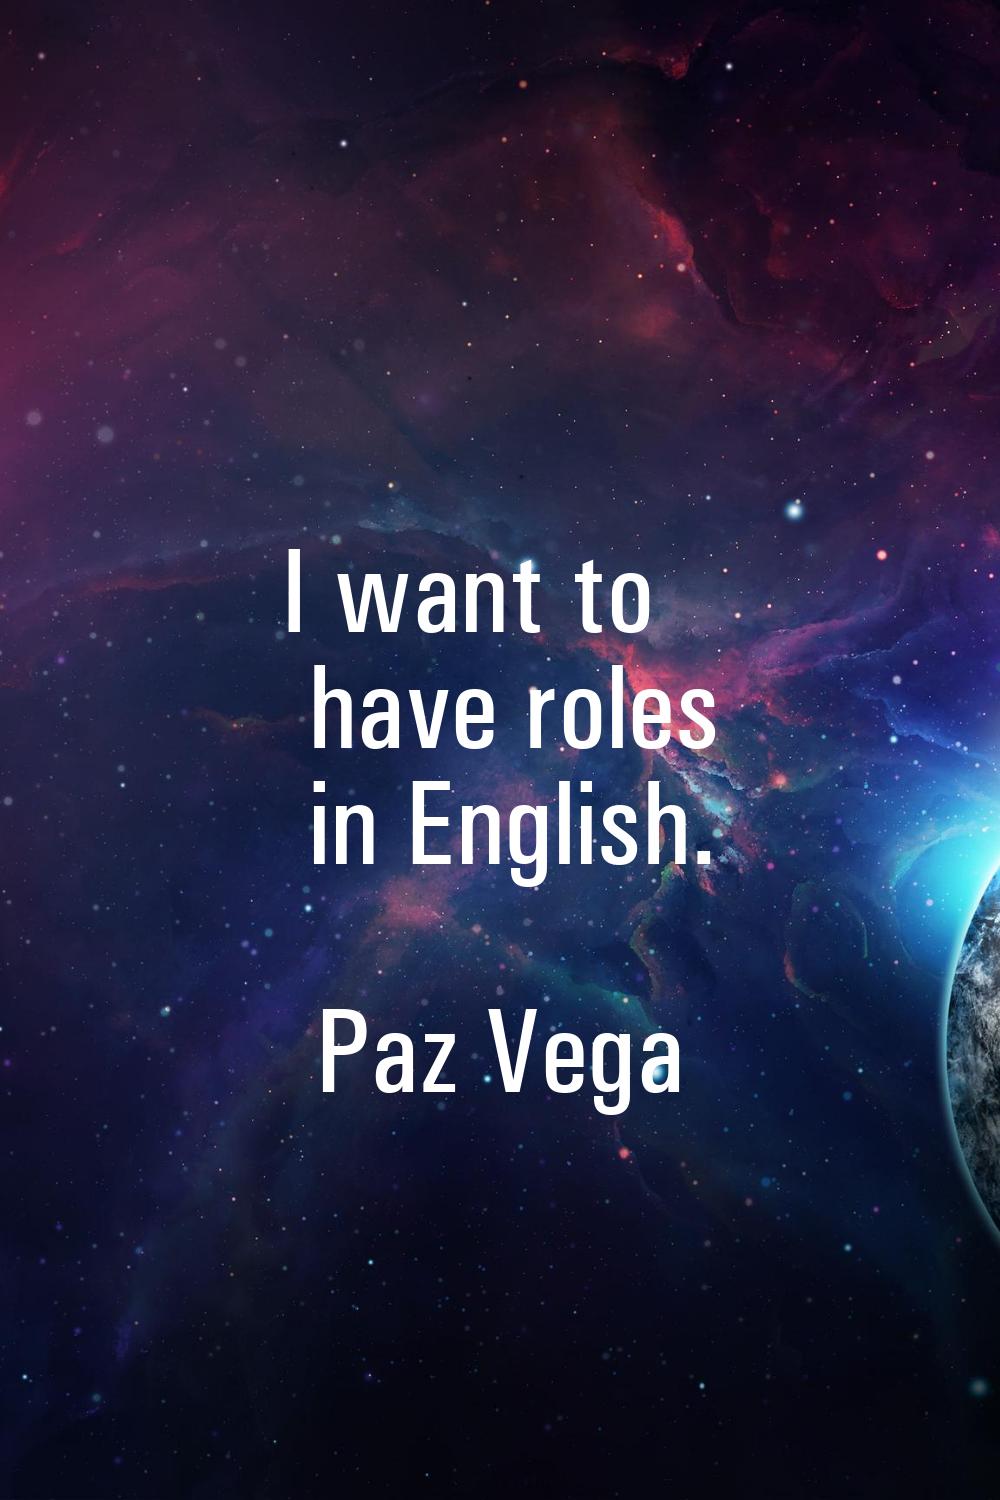 I want to have roles in English.